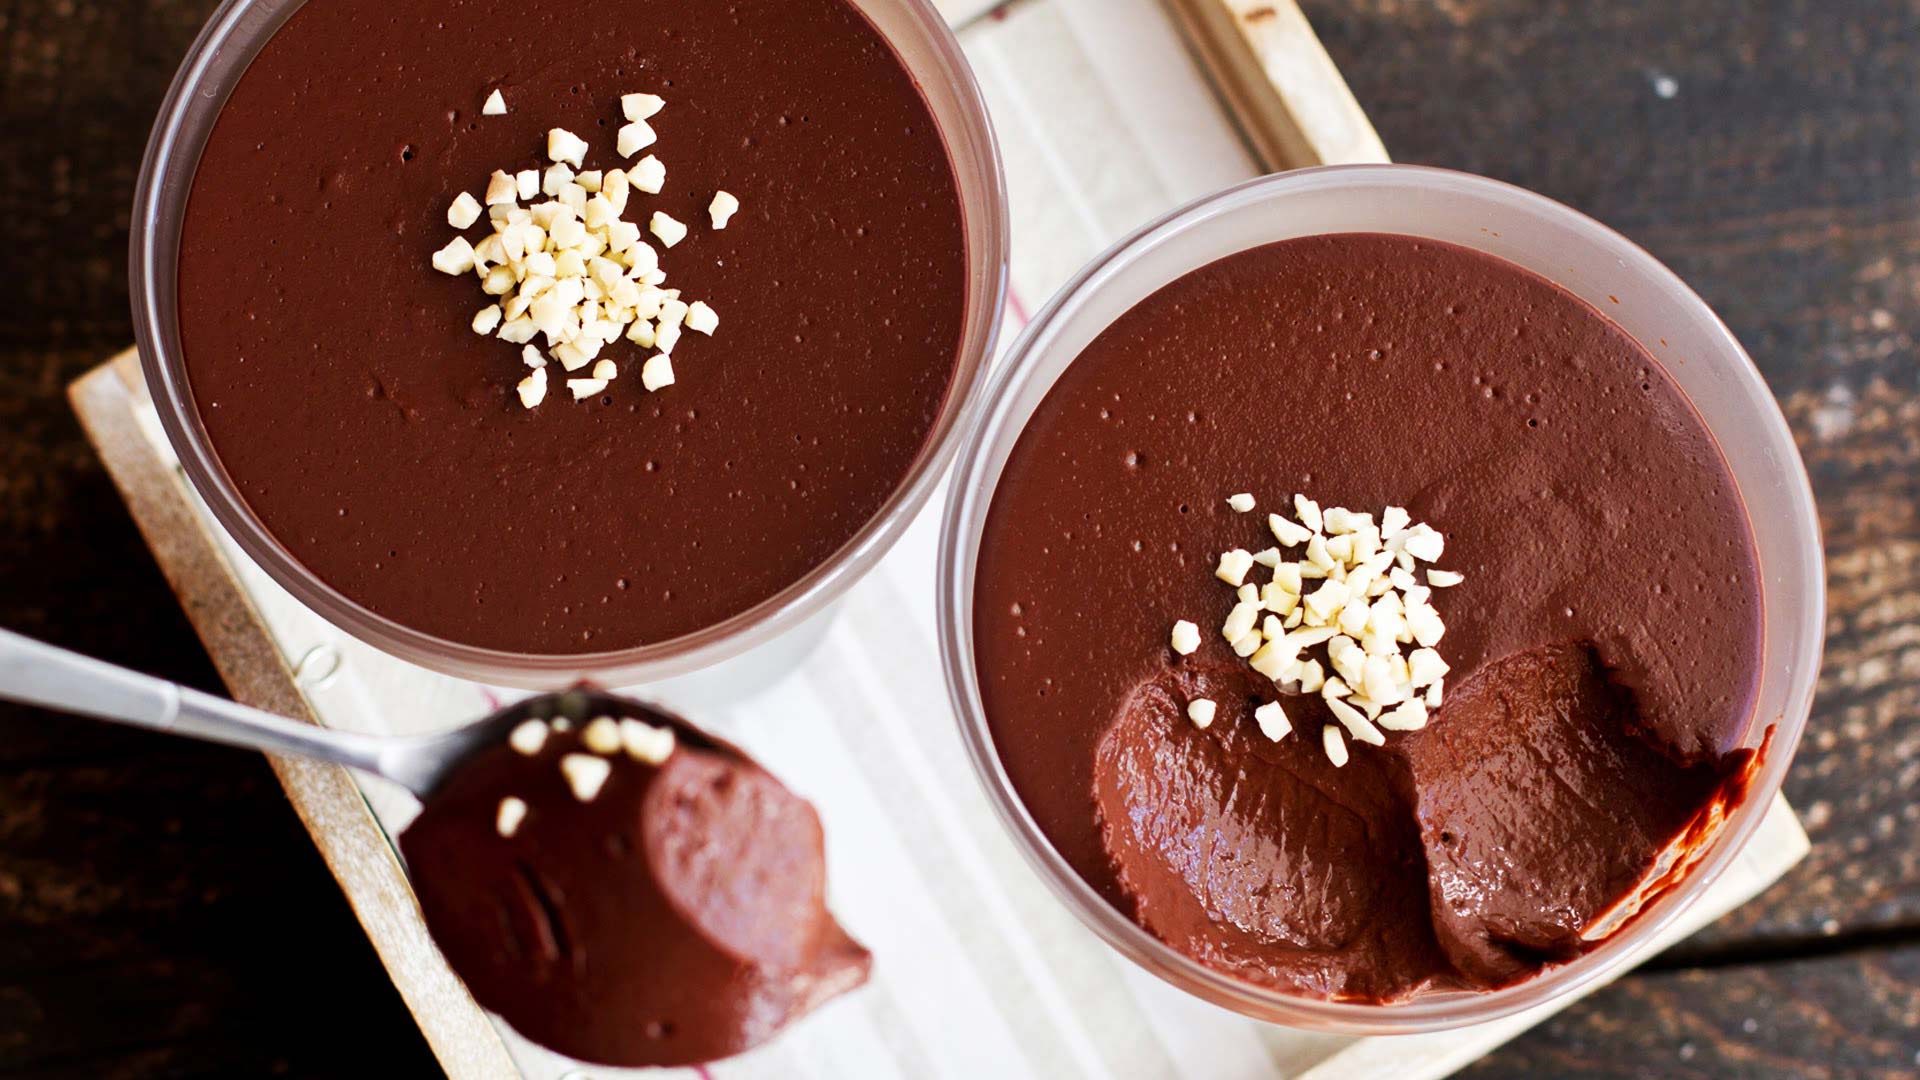 🍪 Only a True Chocoholic Will Have Eaten at Least 13/25 of These Treats Chocolate Pudding